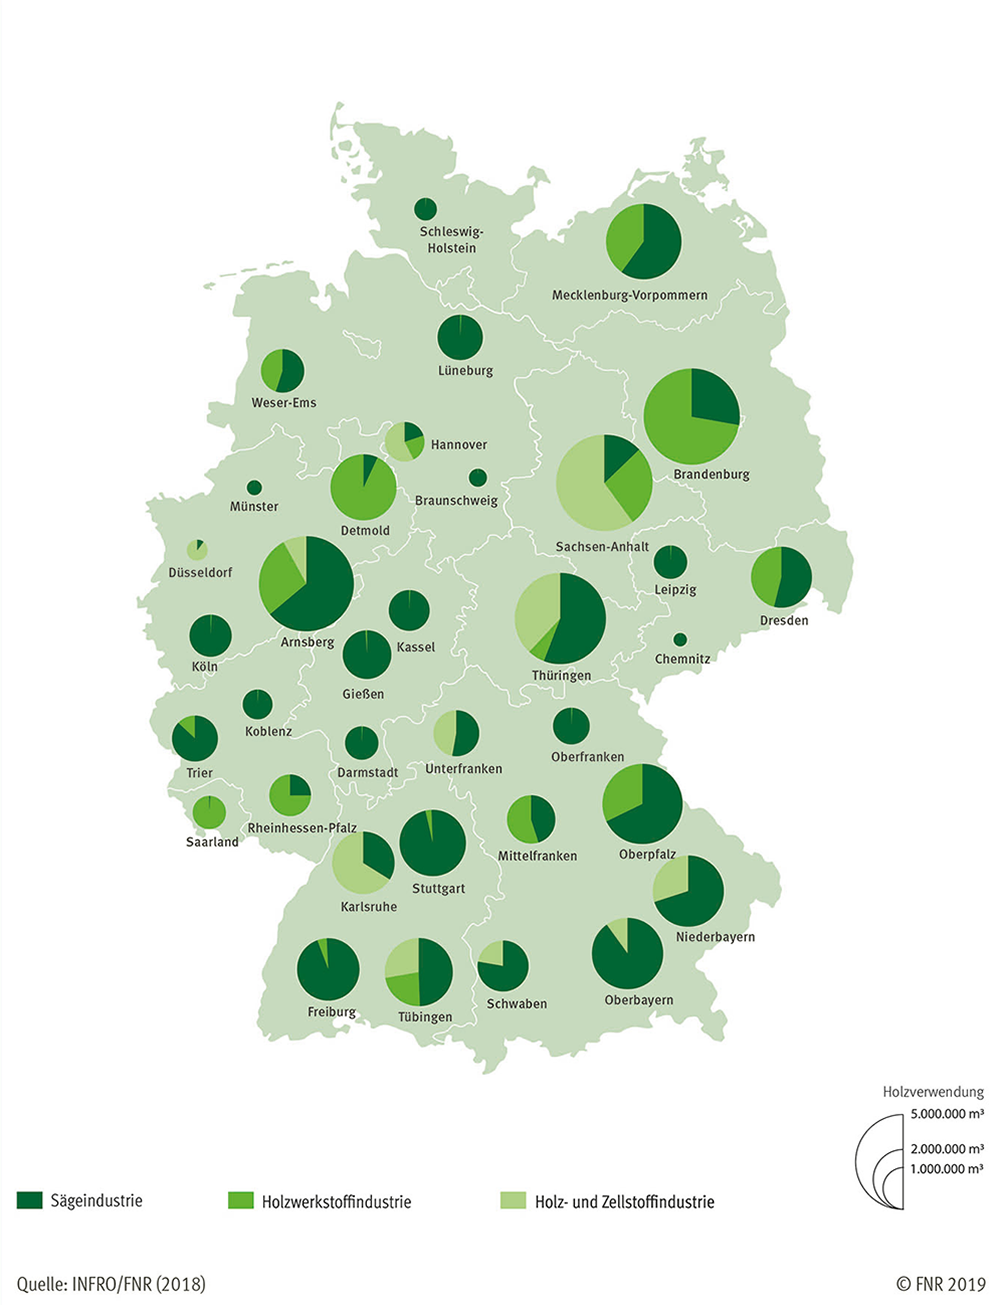 Locations of Wood industry 2015